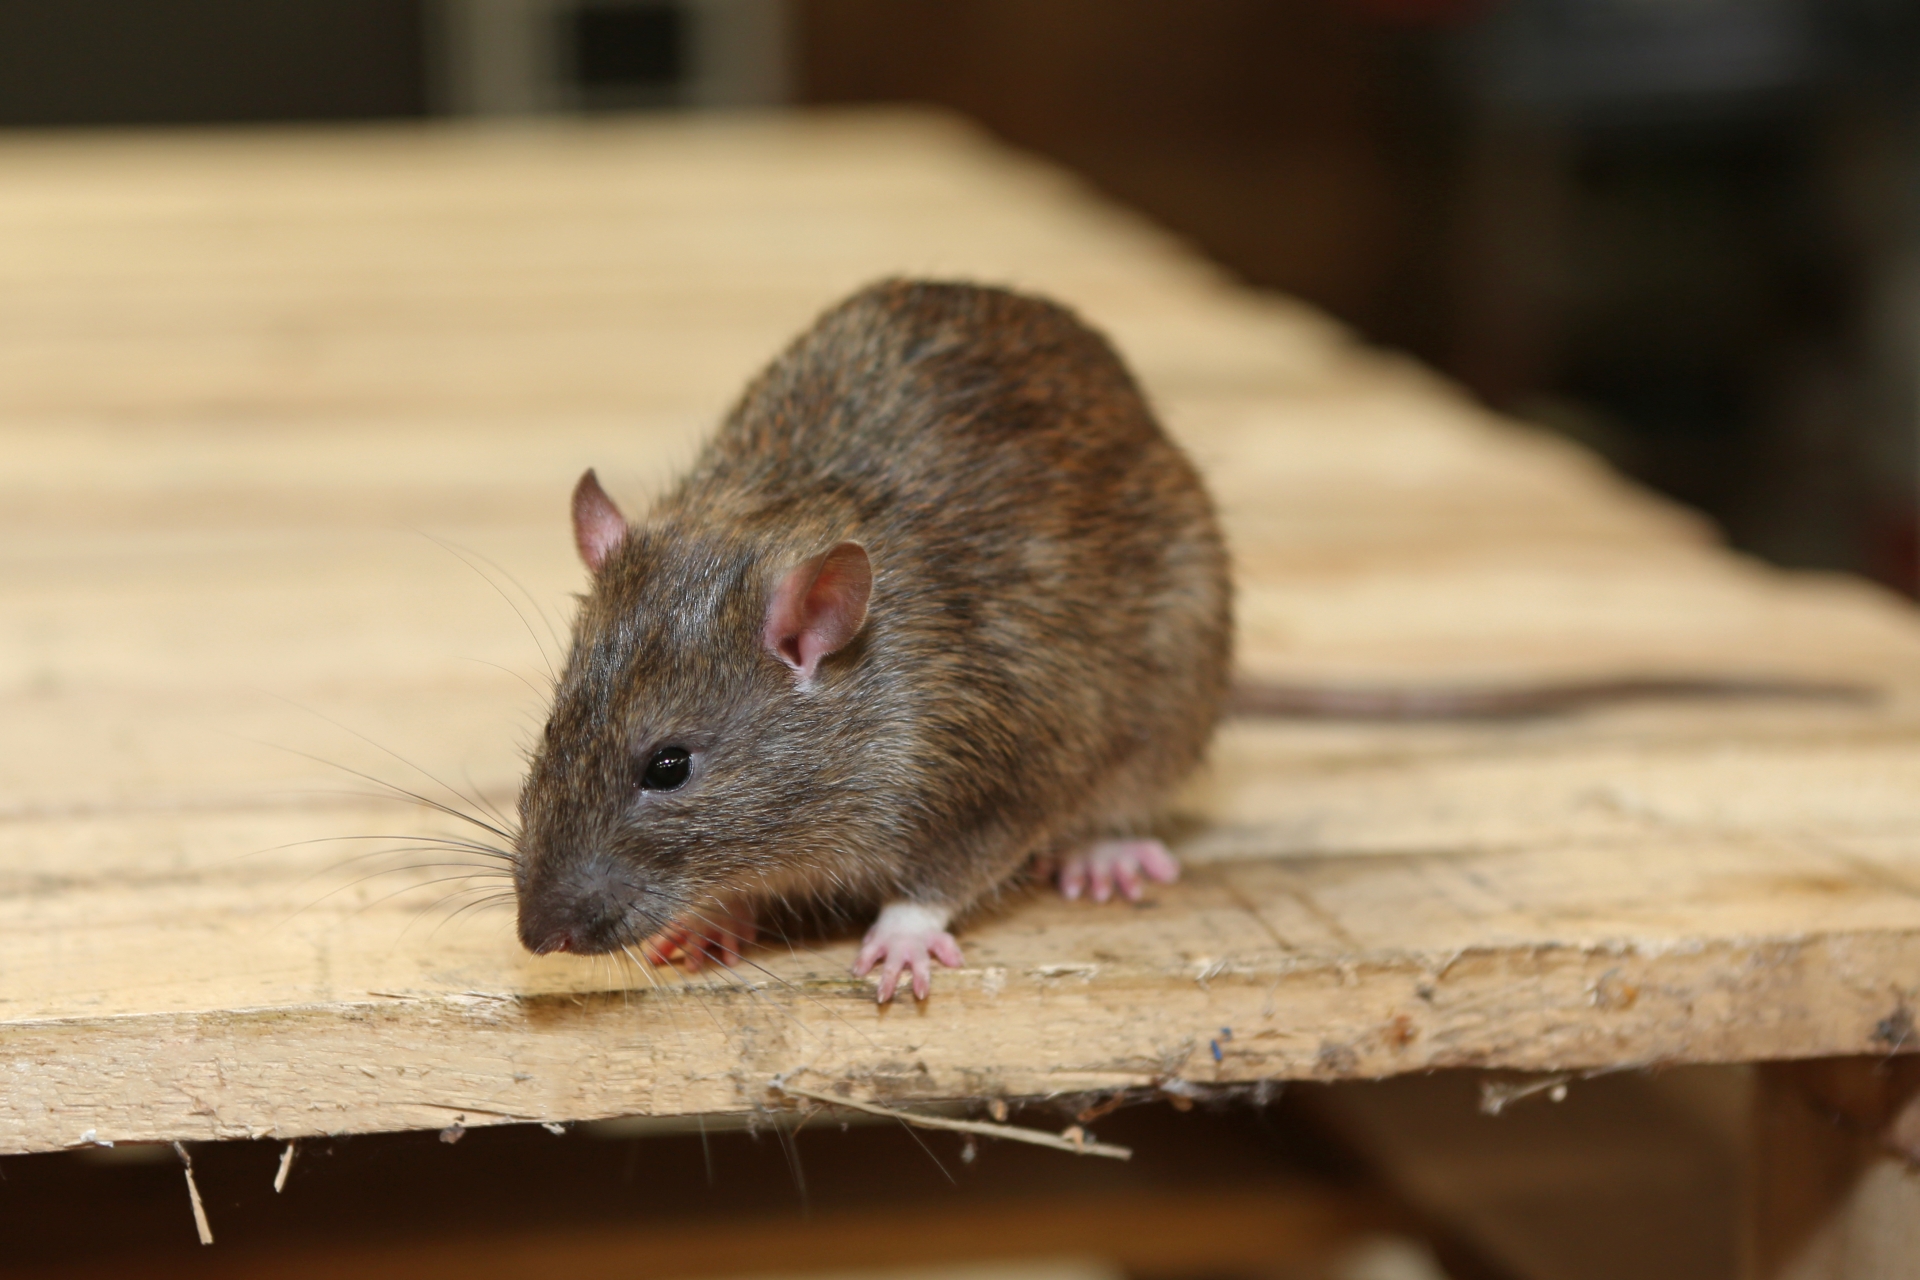 Rat Control, Pest Control in Hanwell, W7. Call Now 020 8166 9746